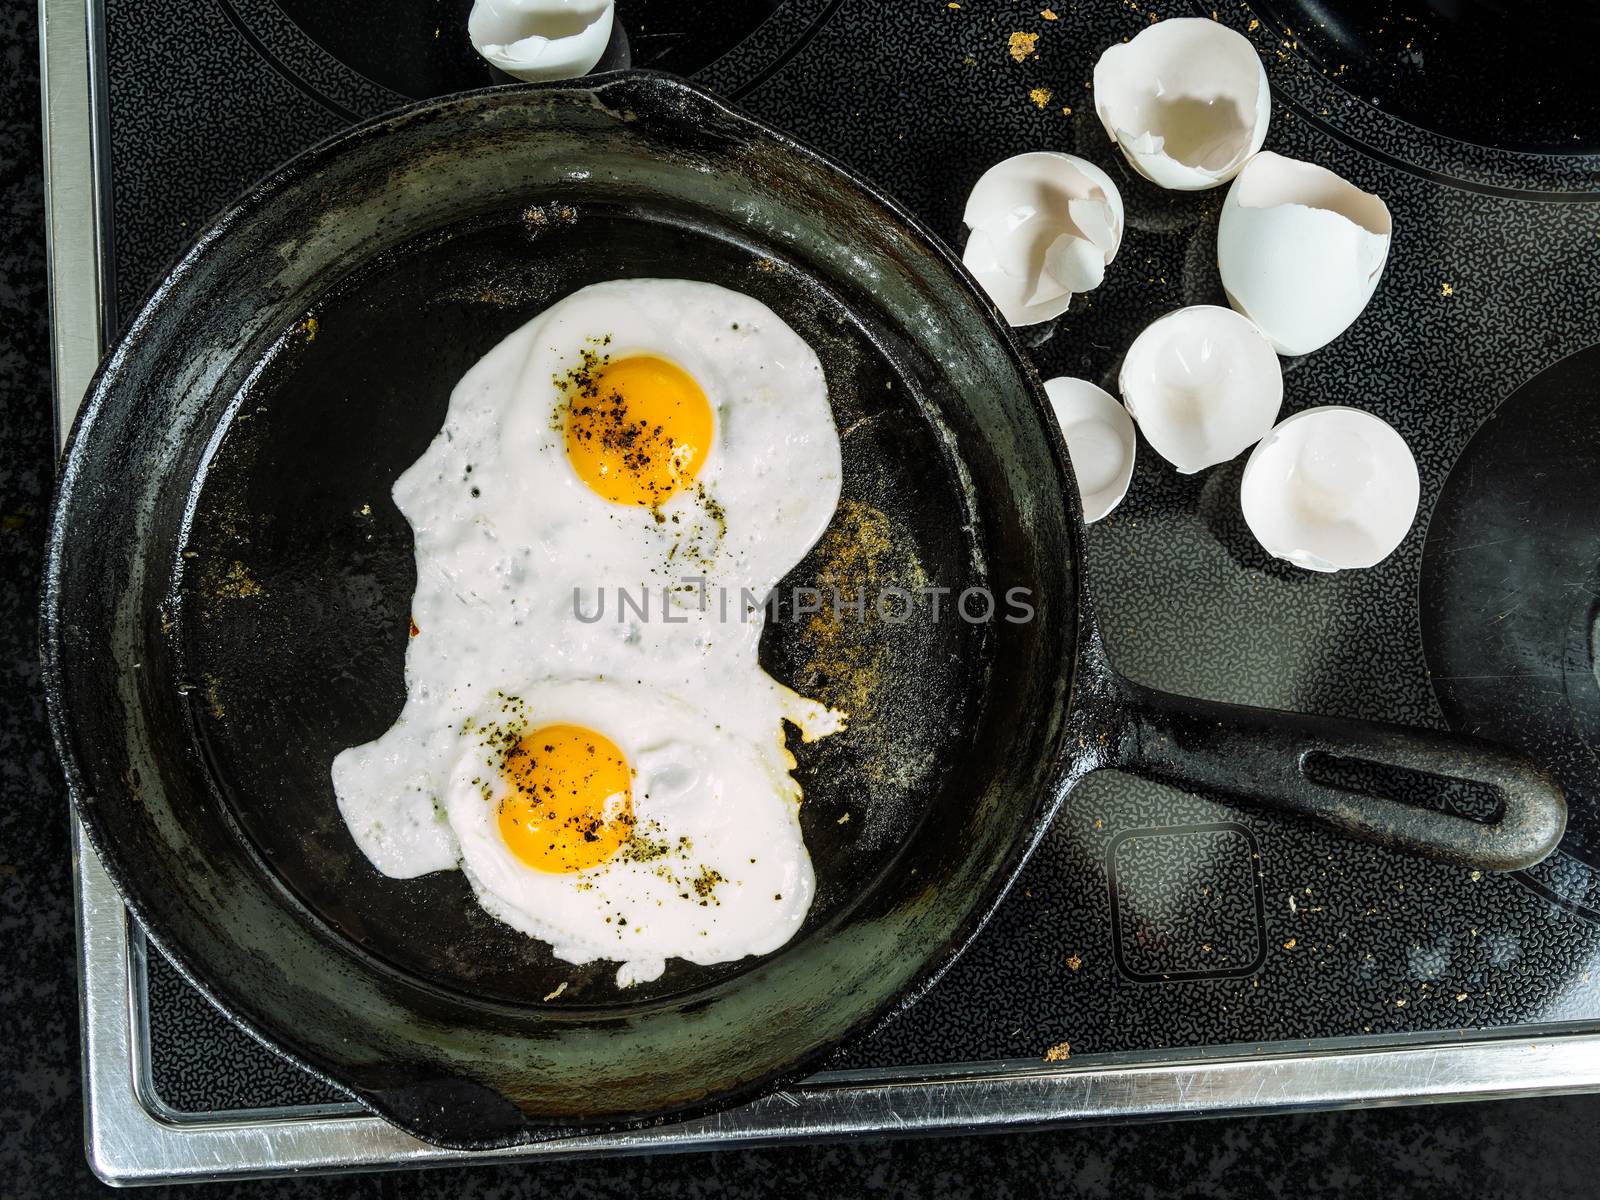 Frying eggs in a cast iron pan by sumners